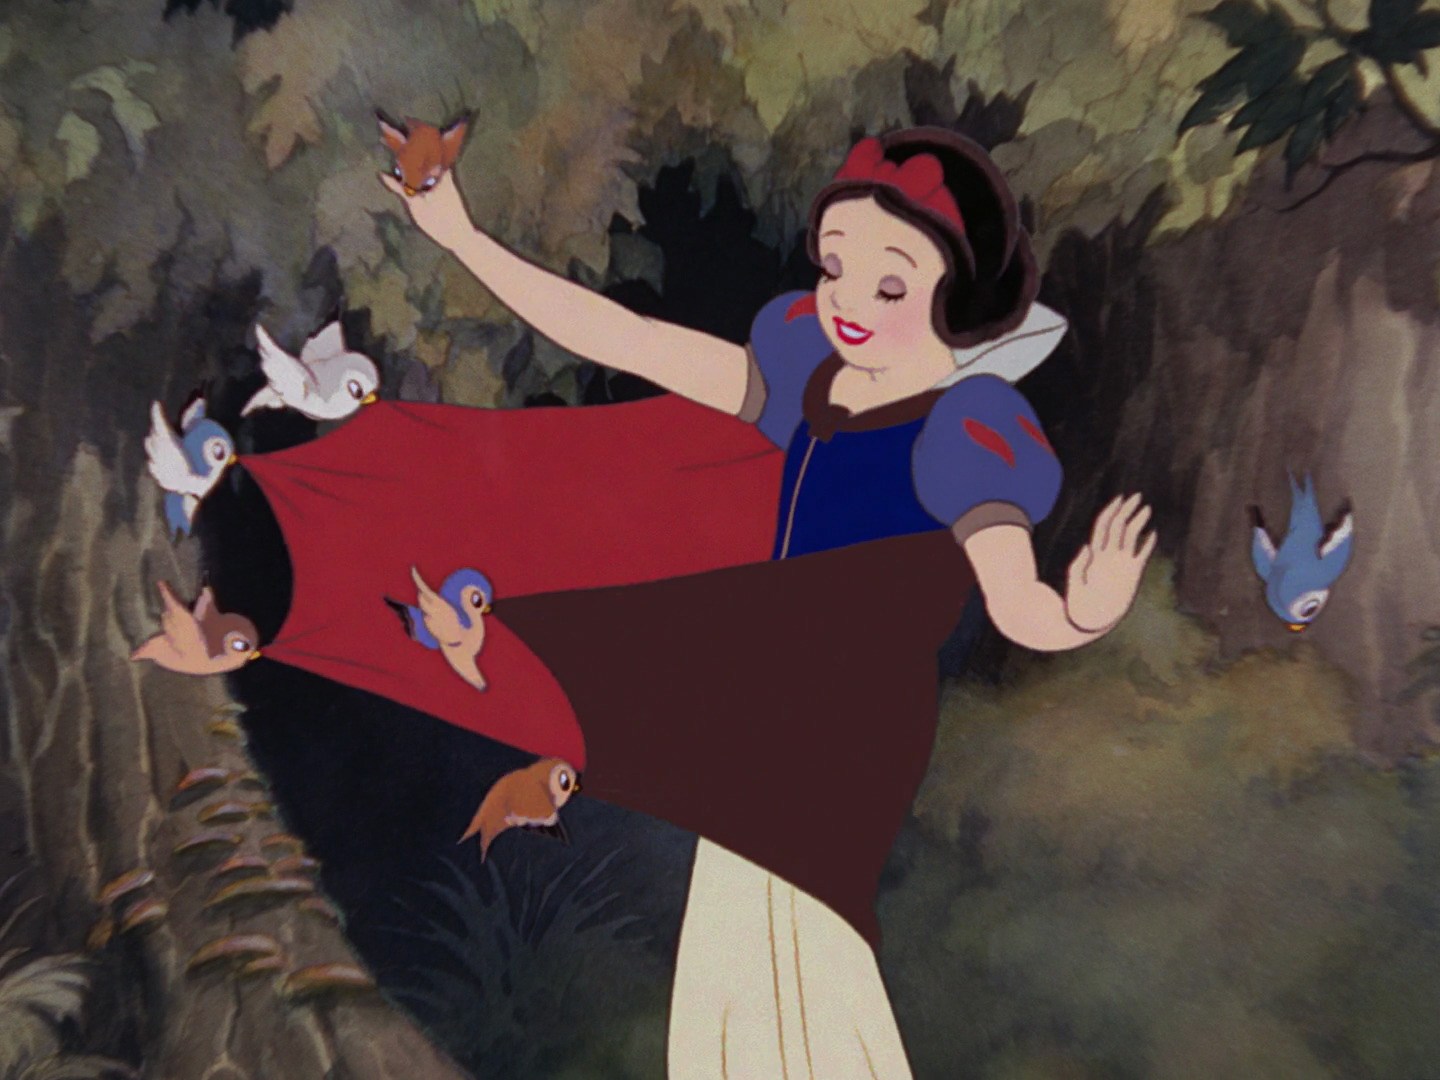 Snow White in Disney’s original animated Snow White and the Seven Dwarfs. She is in the forest and five small birds are pulling at her cape.